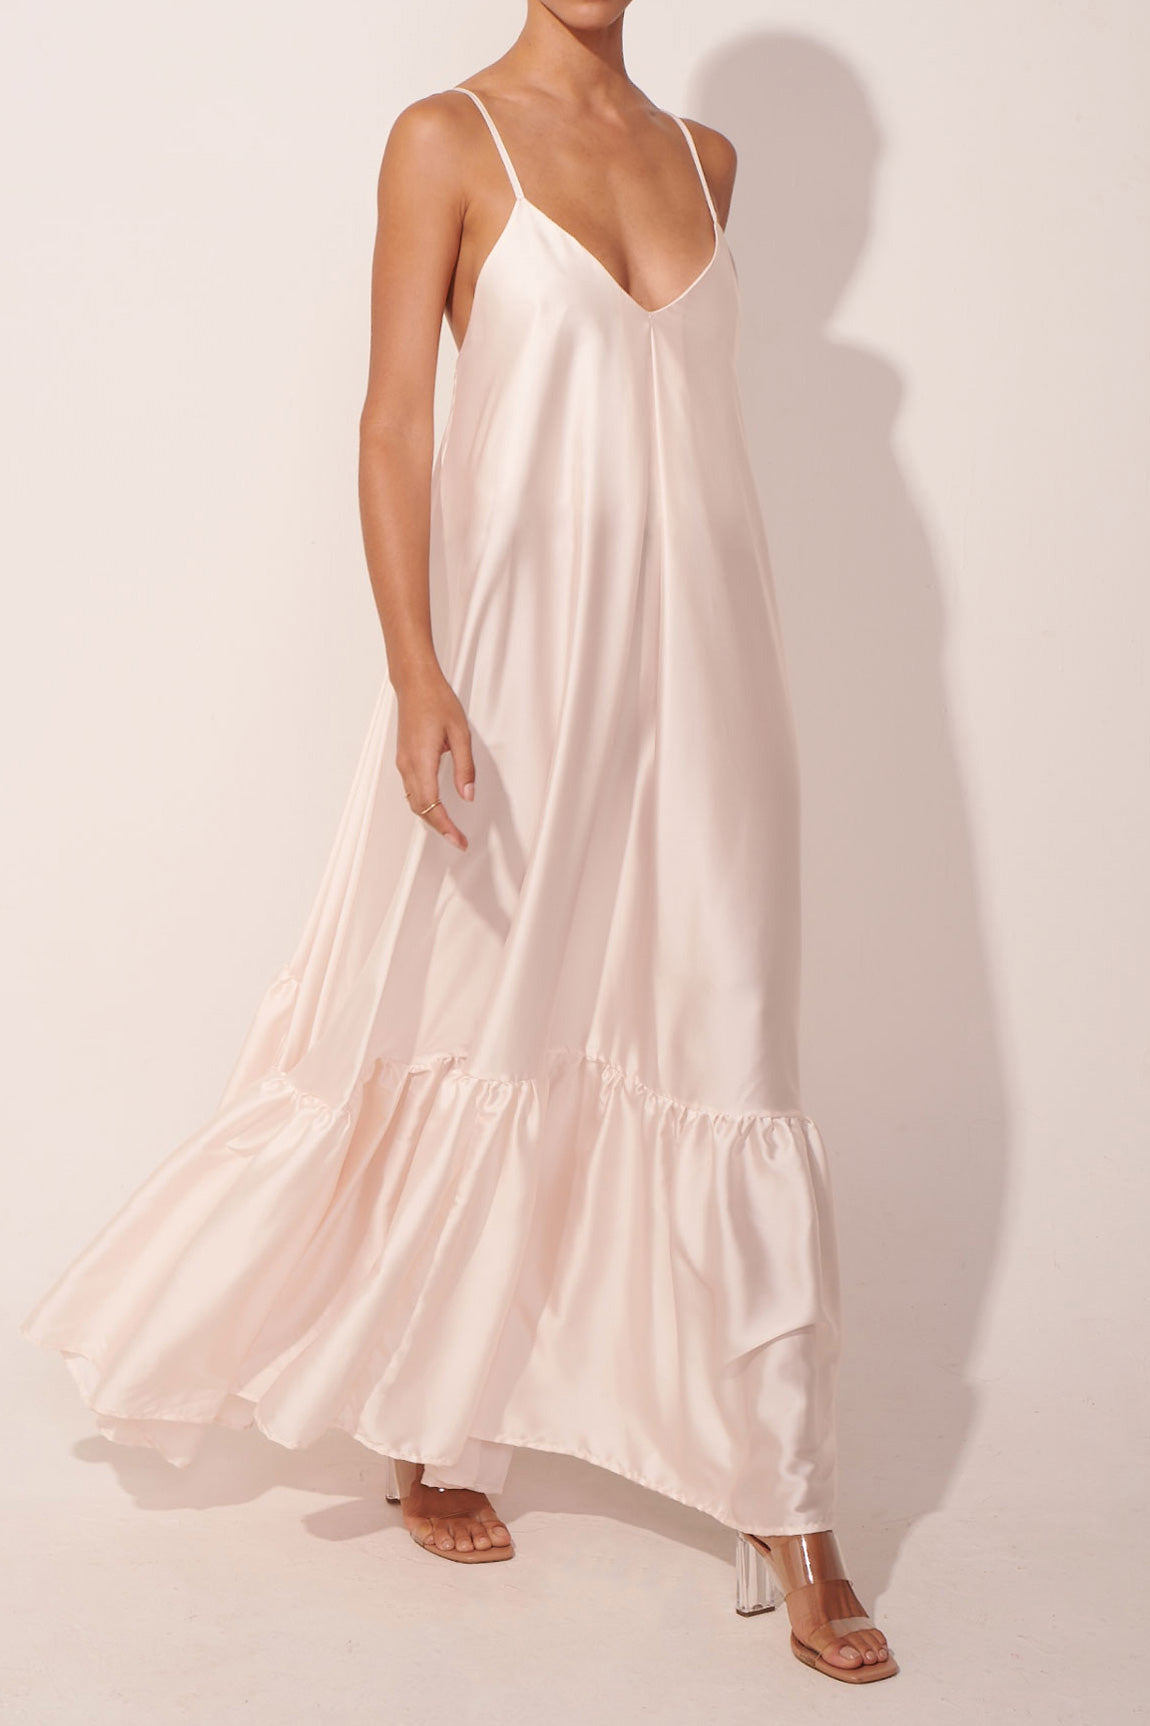 The Staycation Ivory Maxi Dress